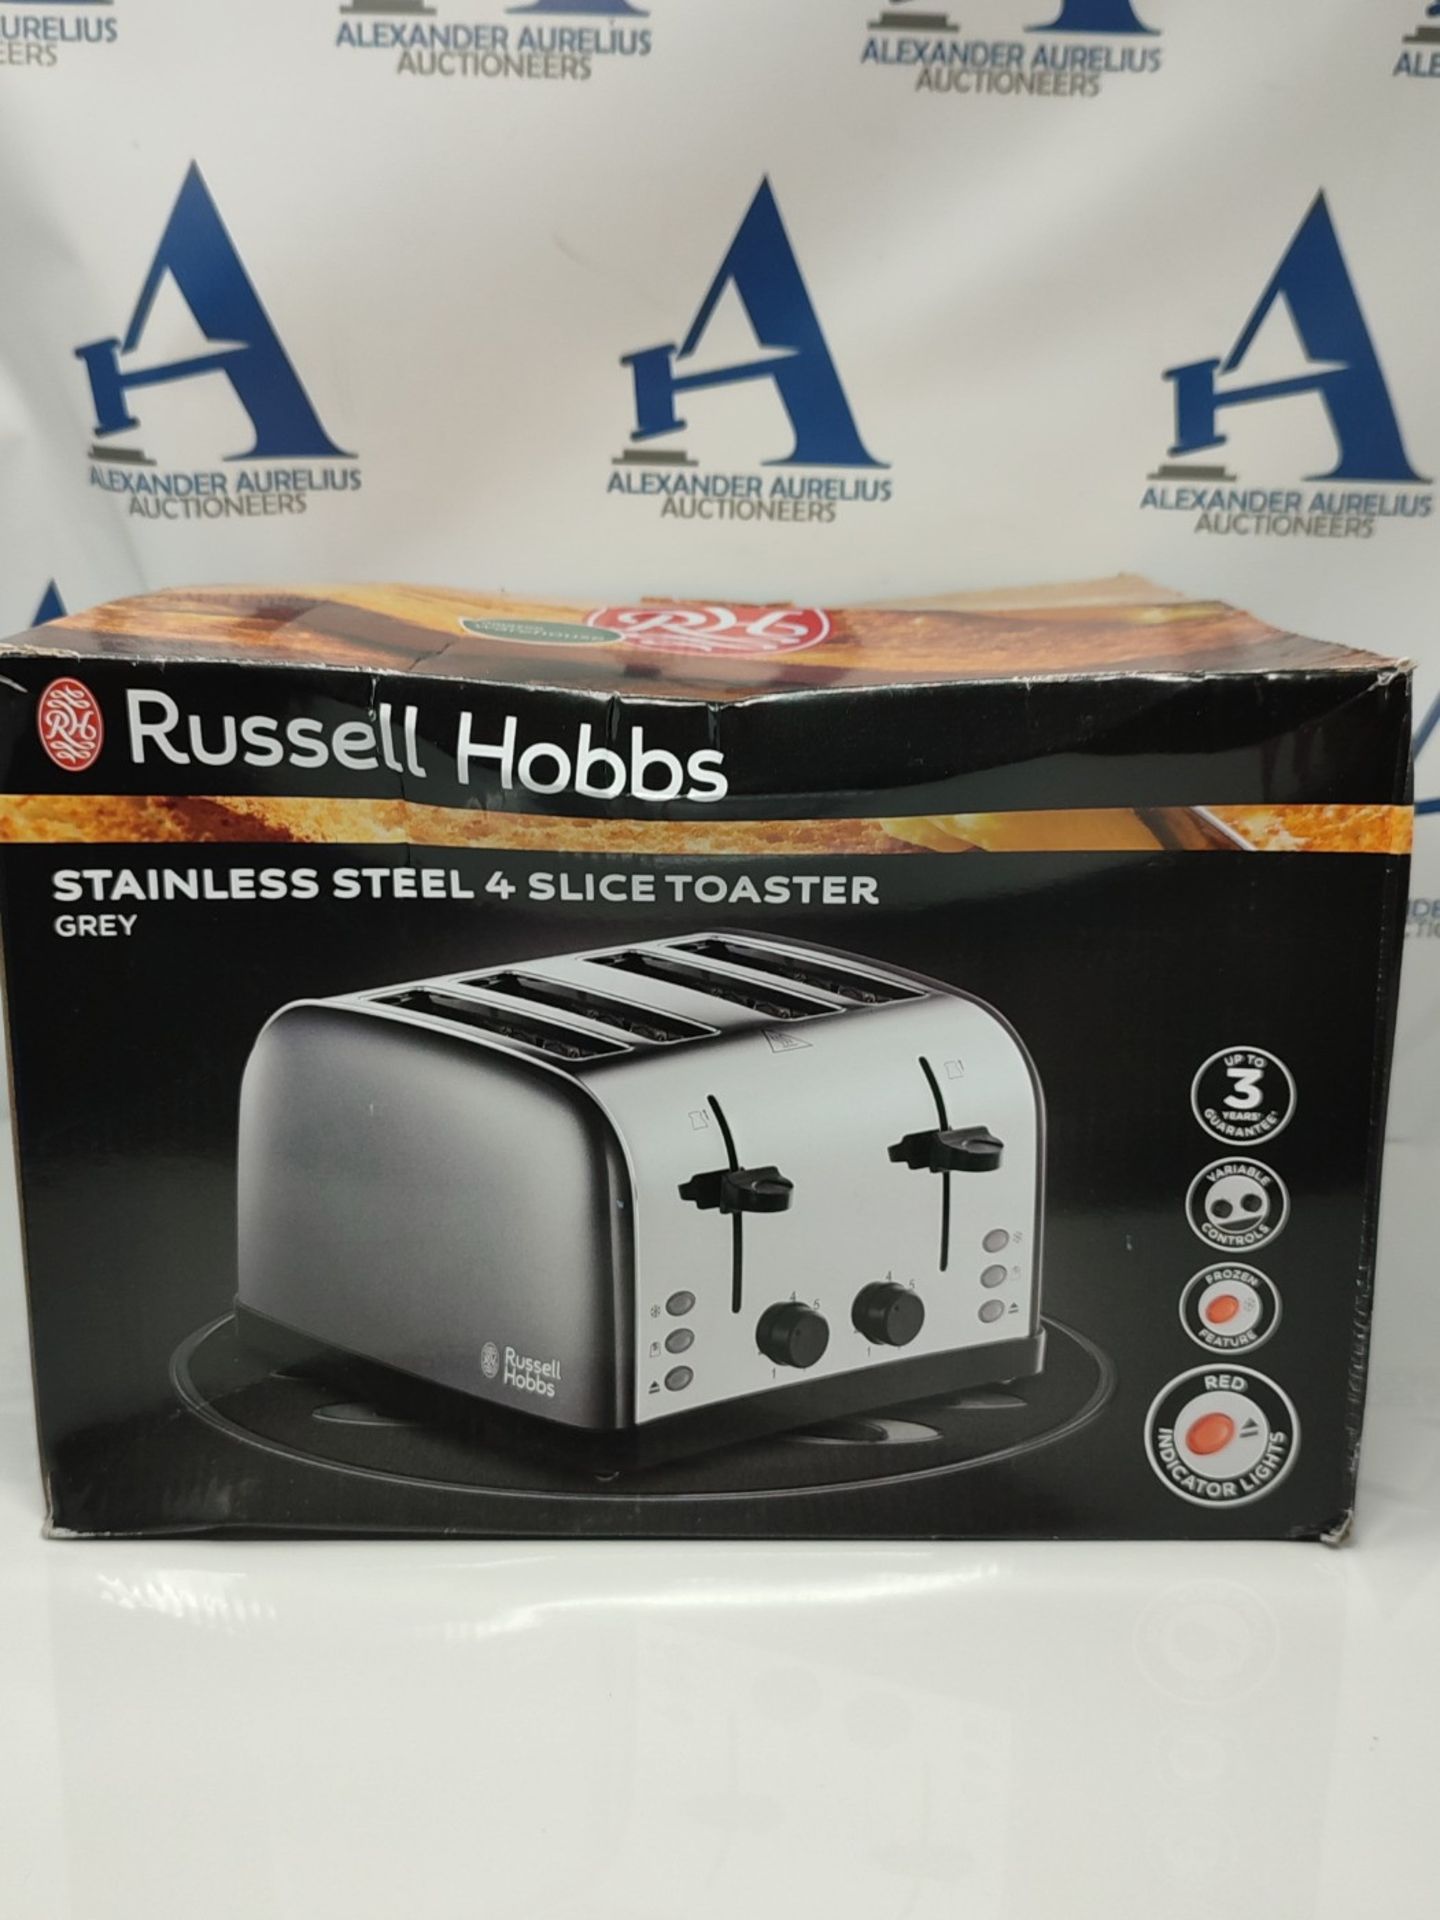 Russell Hobbs 28364 Stainless Steel Toaster, 4 Slice with Variable Browning Settings a - Bild 2 aus 3